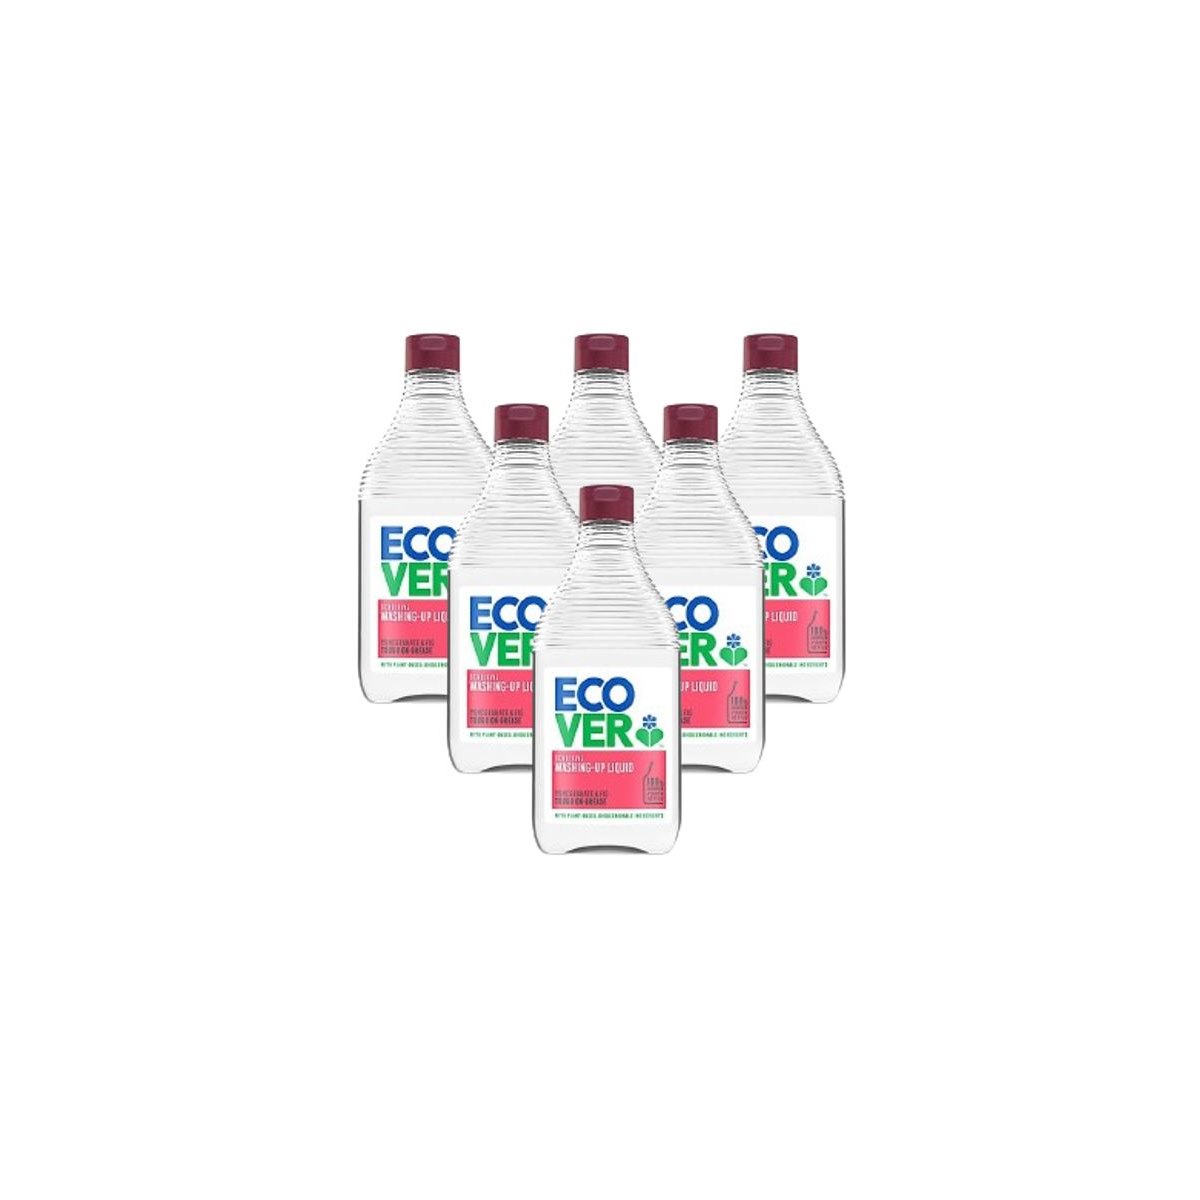 Case of 6 x Ecover Washing Up Liquid Pomegranate and Fig 450ml